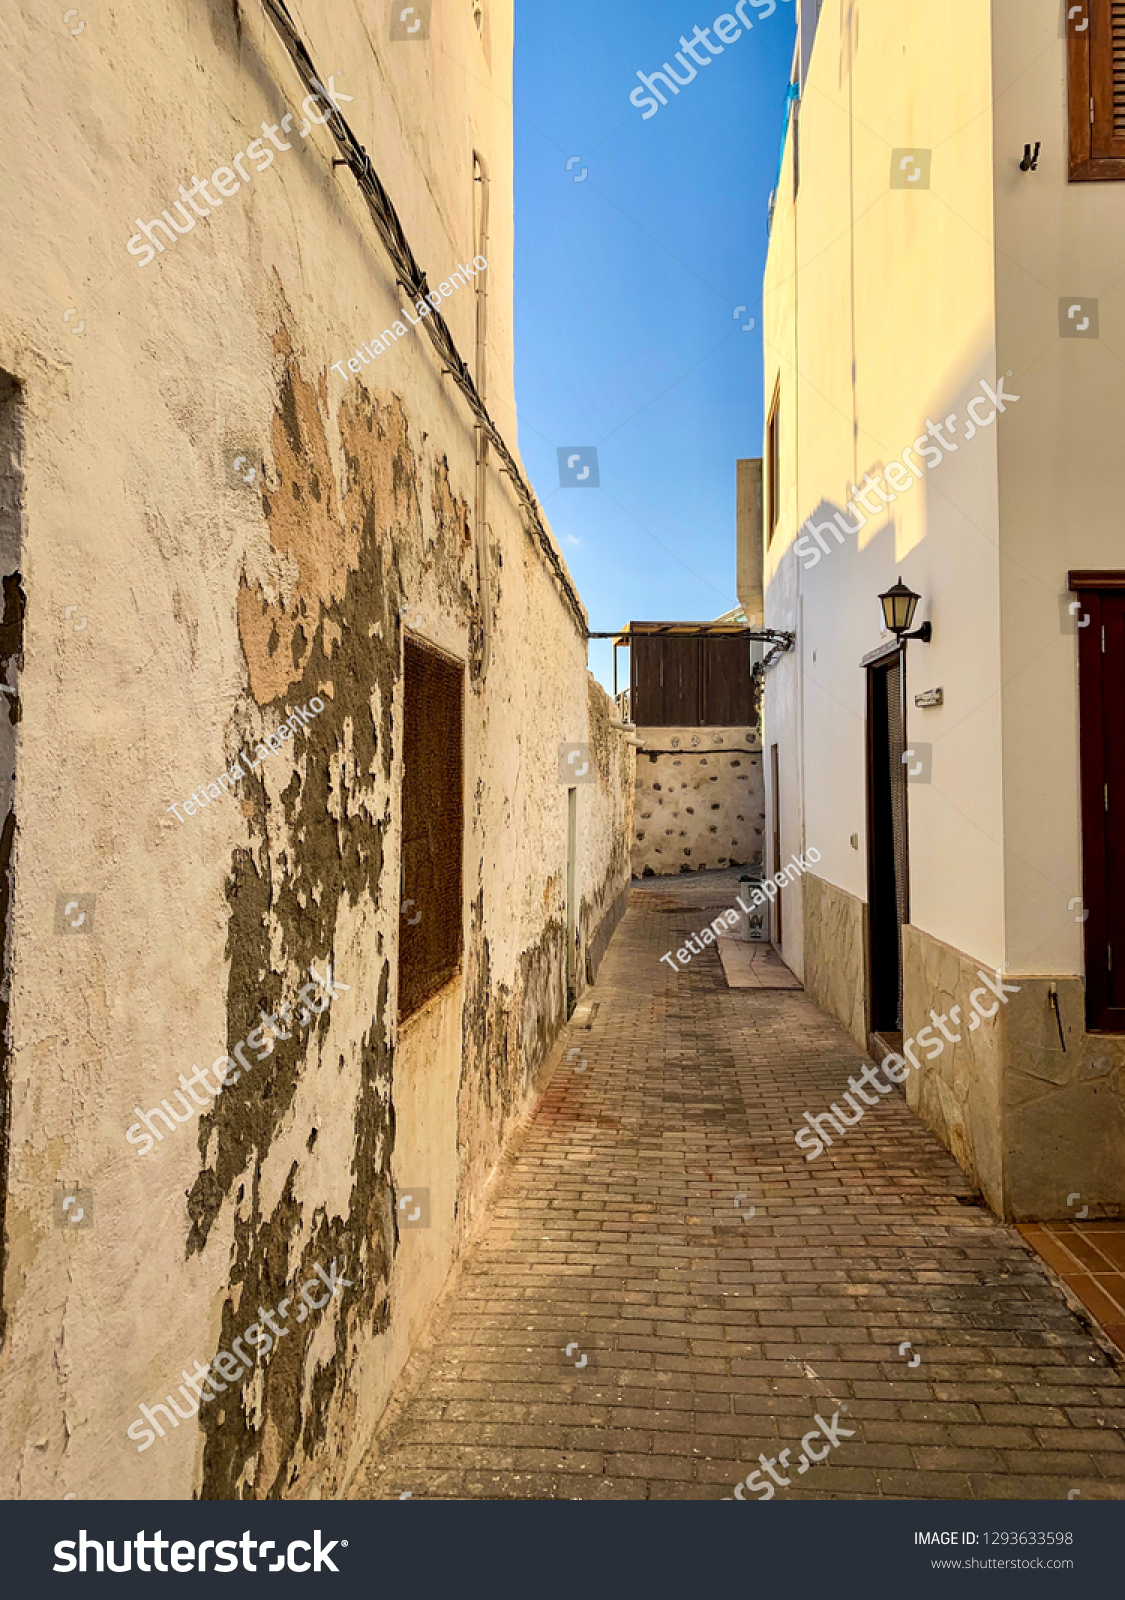 View of the street with white shabby walls of small buildings, architecture buildings with peeling paint, cosy street in fishing town El Cotillo on Atlantic coast  #1293633598